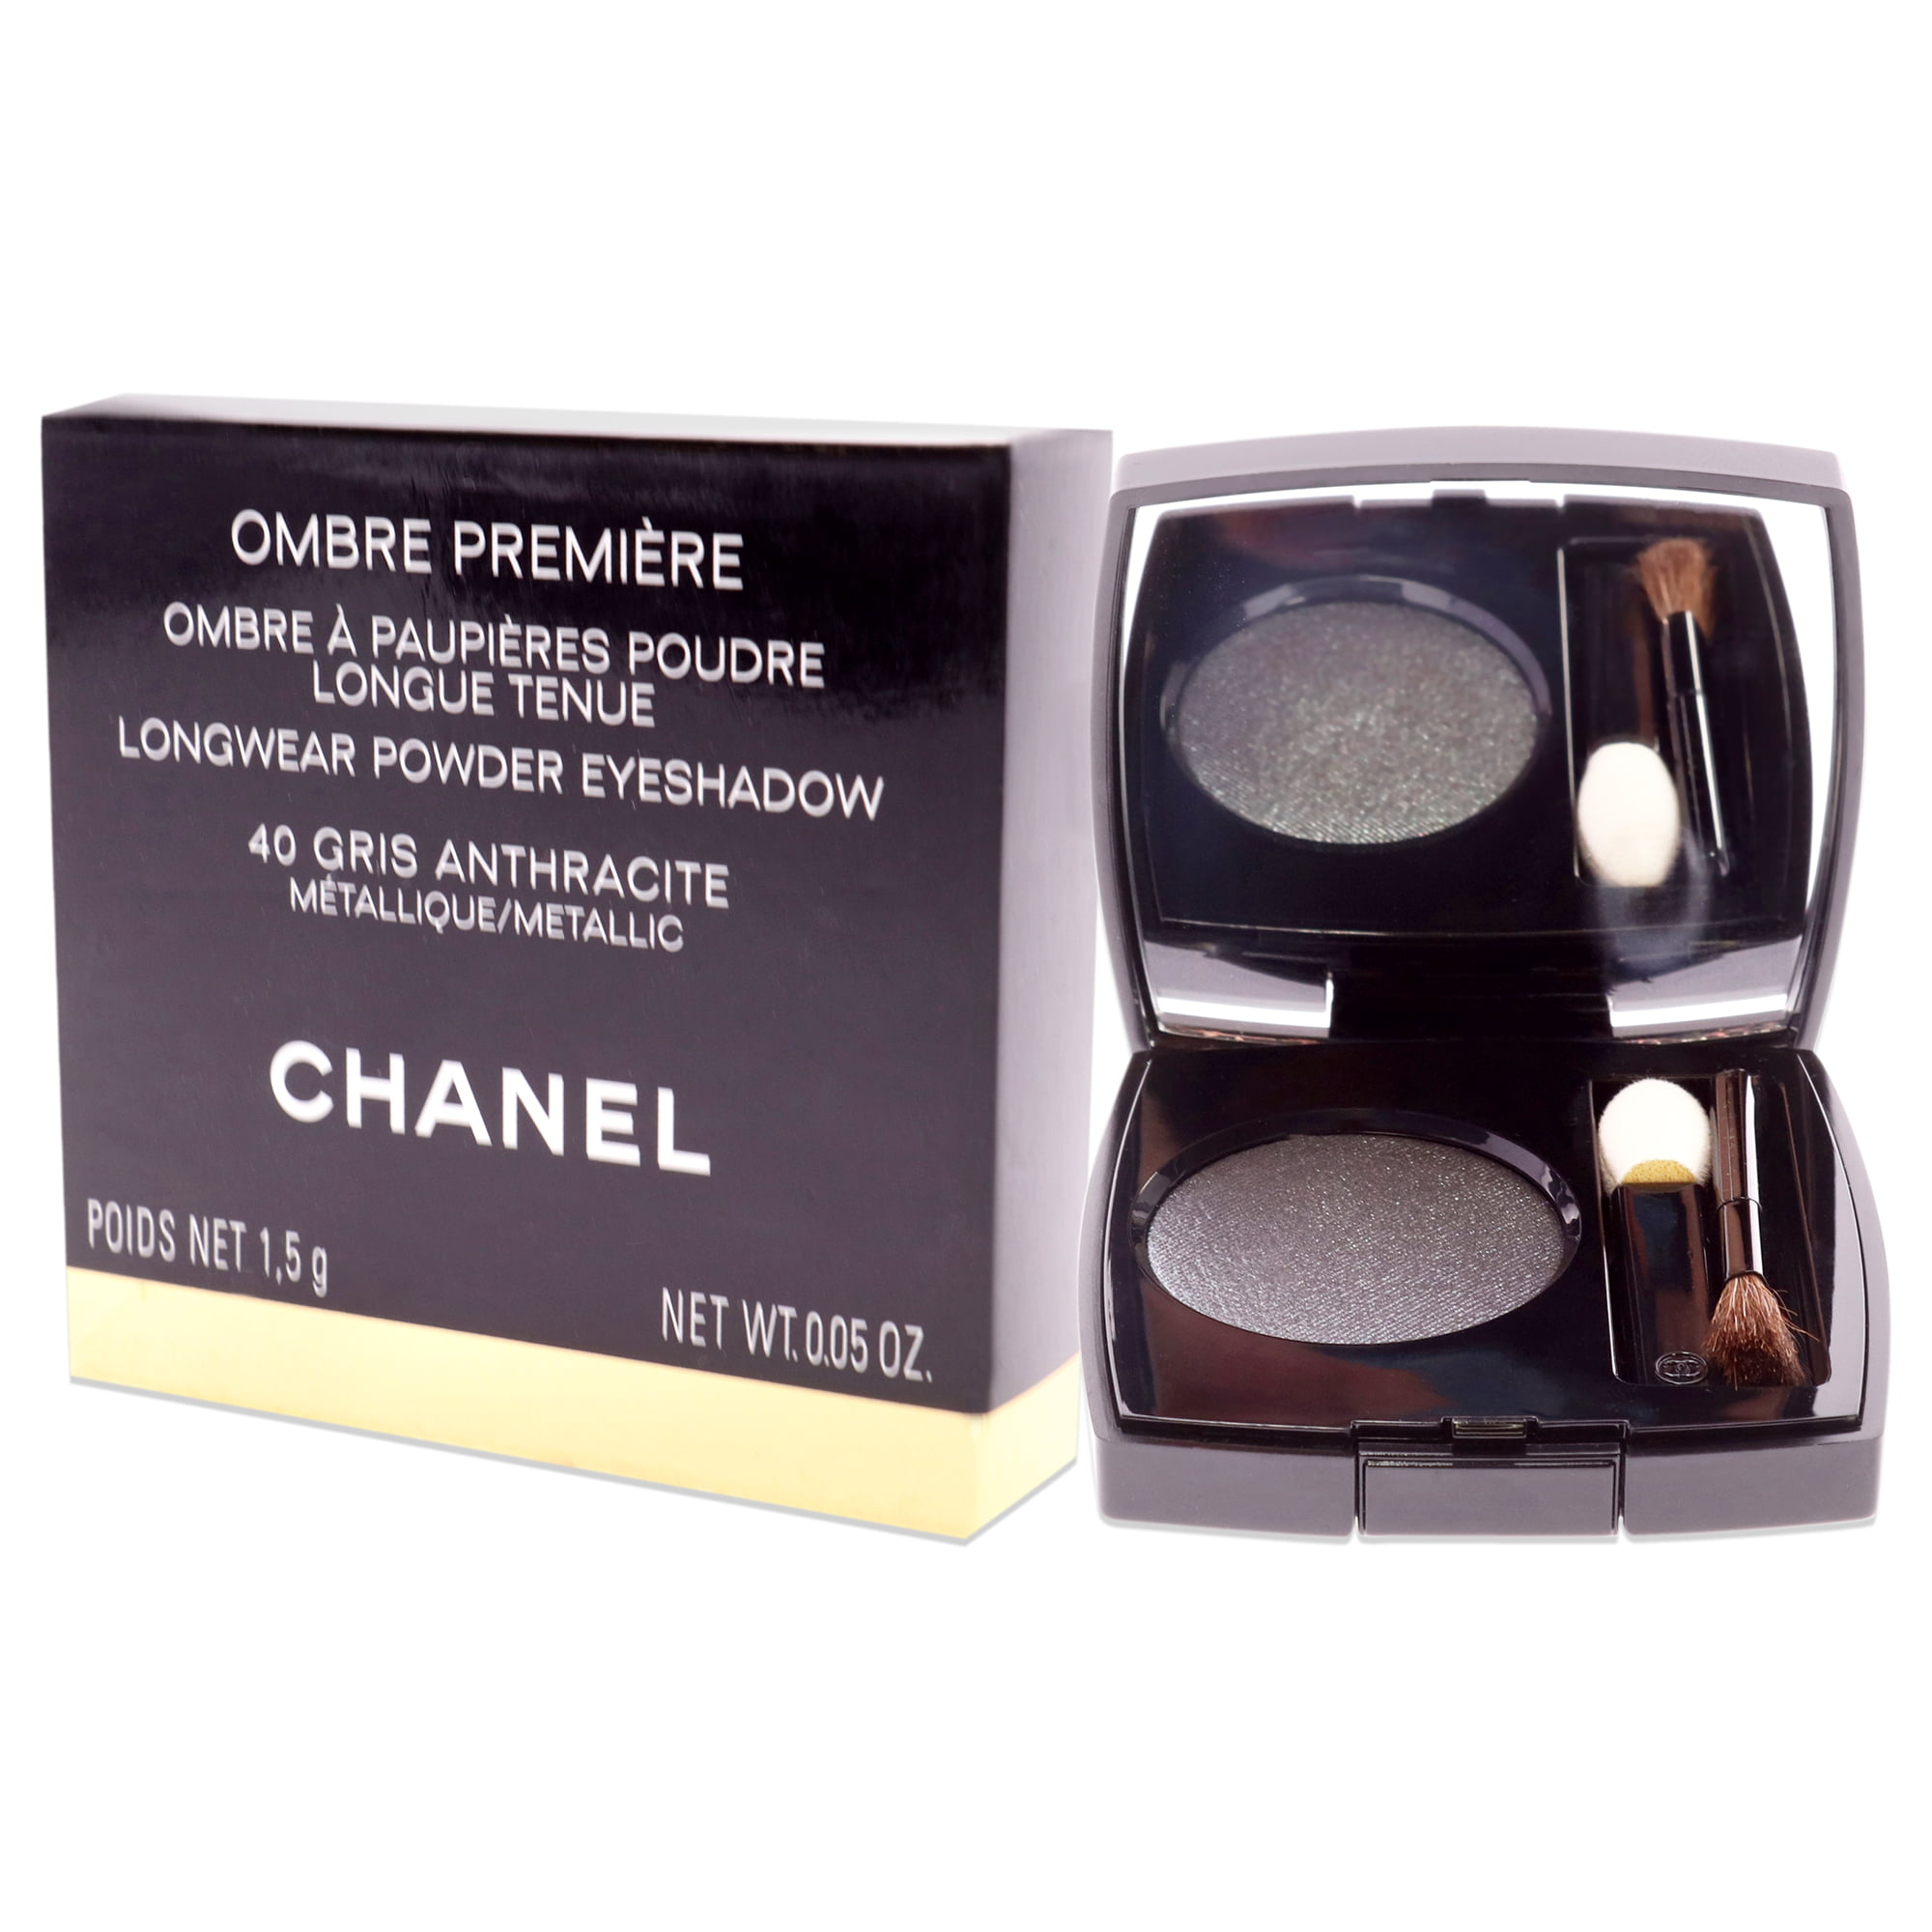 CHANEL CHANEL LES 9 OMBRES Multi-Effects Eyeshadow Palette - Bergdorf  Goodman